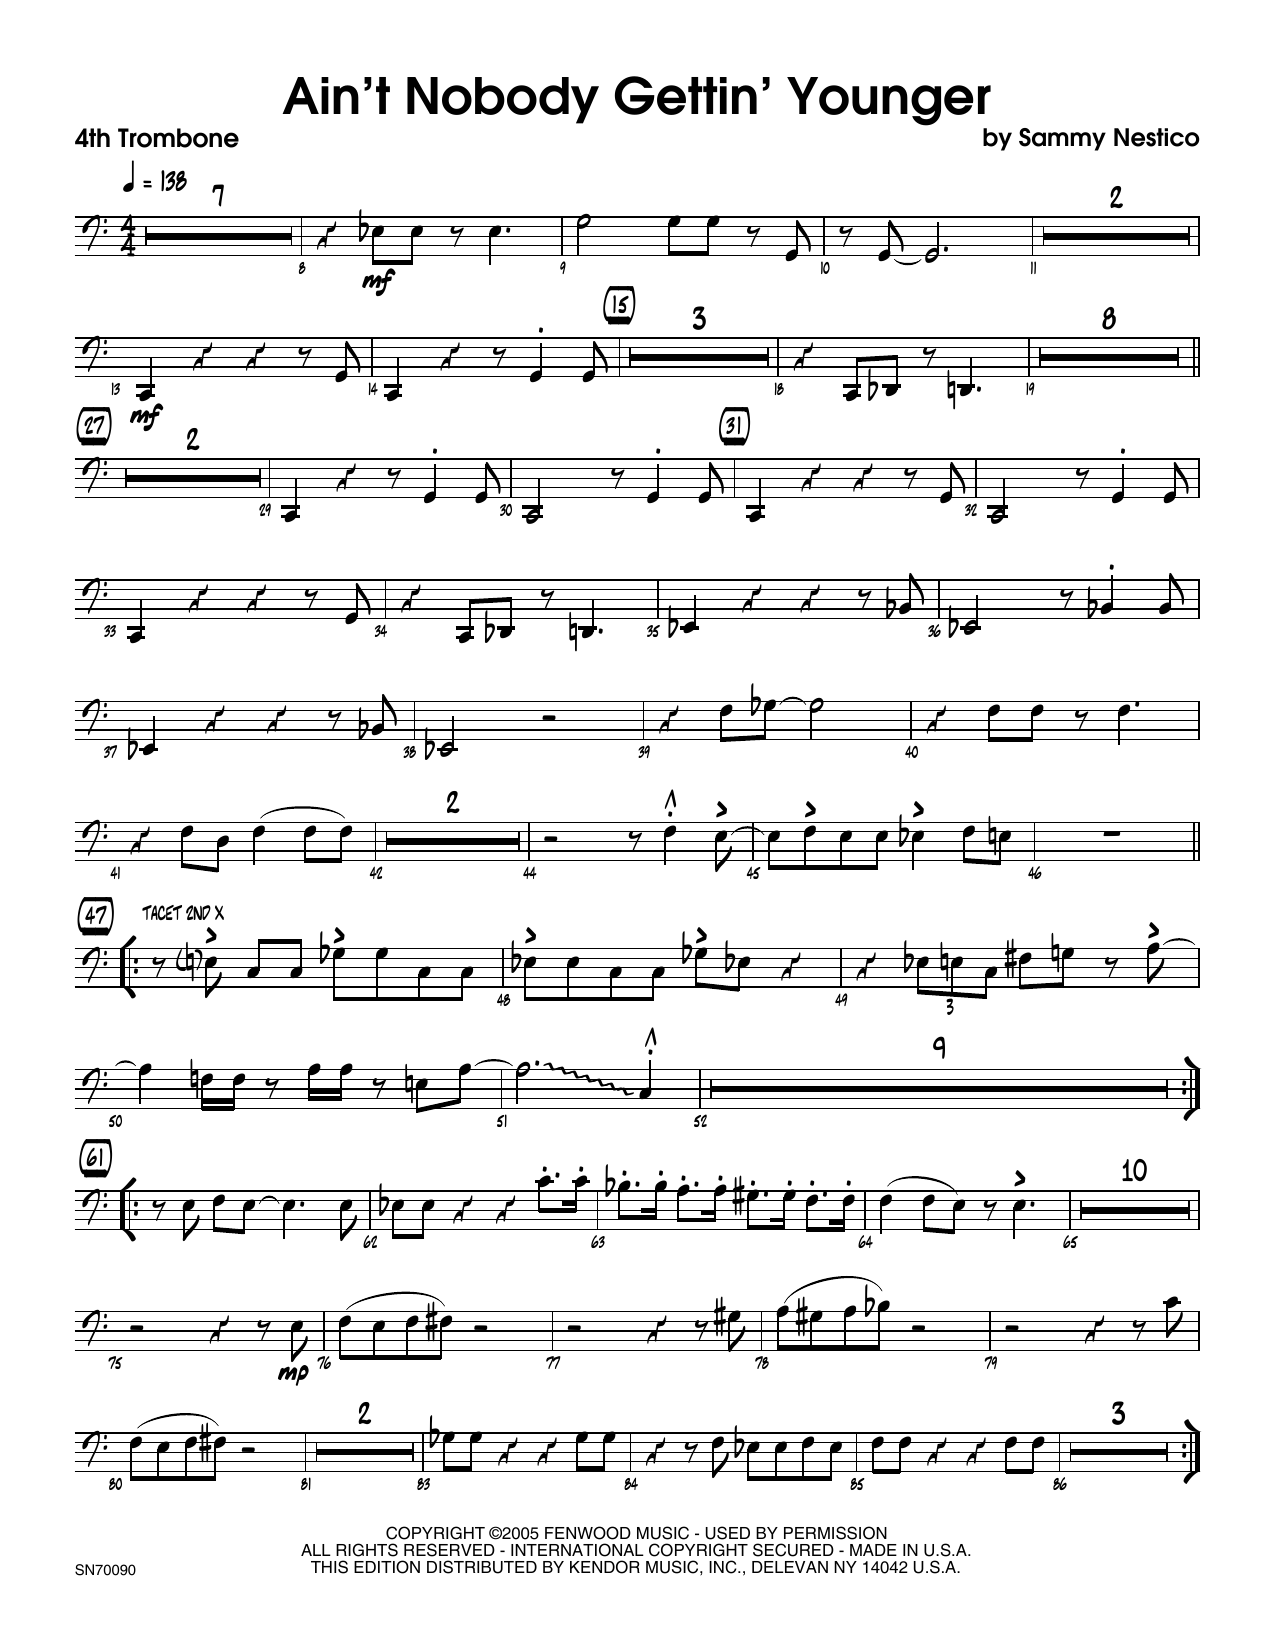 Download Sammy Nestico Ain't Nobody Gettin' Younger - 4th Trom Sheet Music